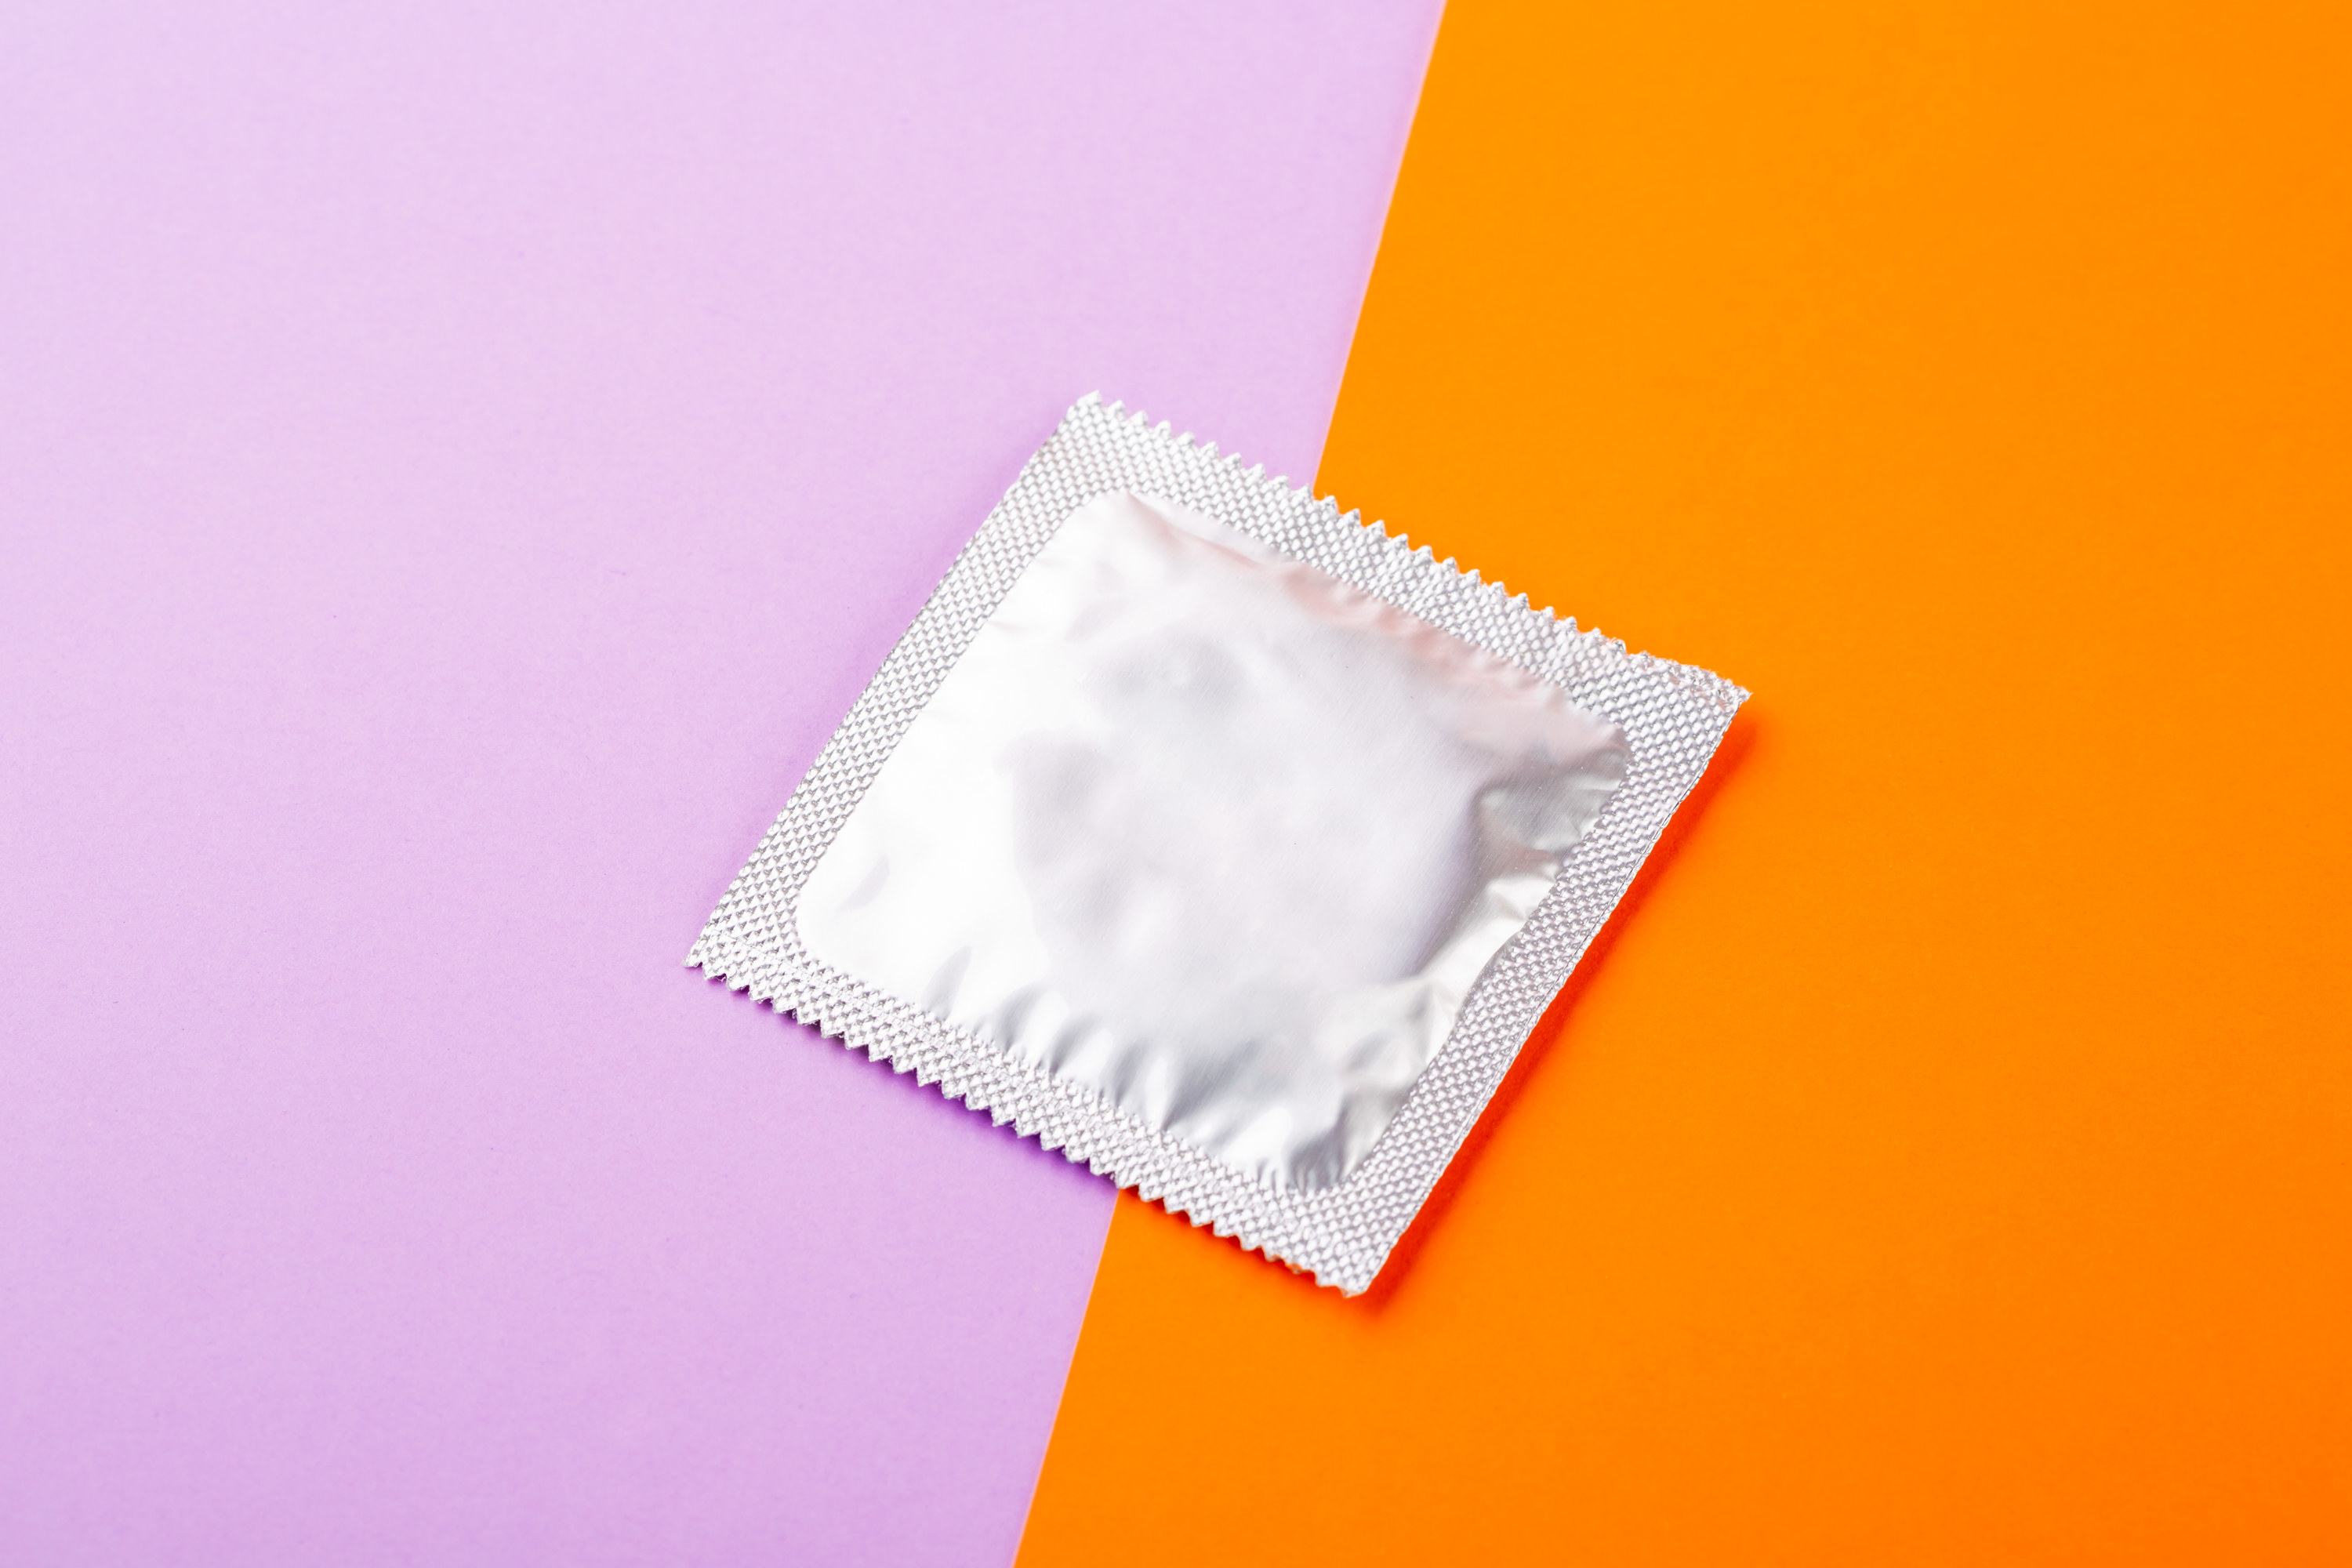 A wrapped condom in front of a pink and orange background